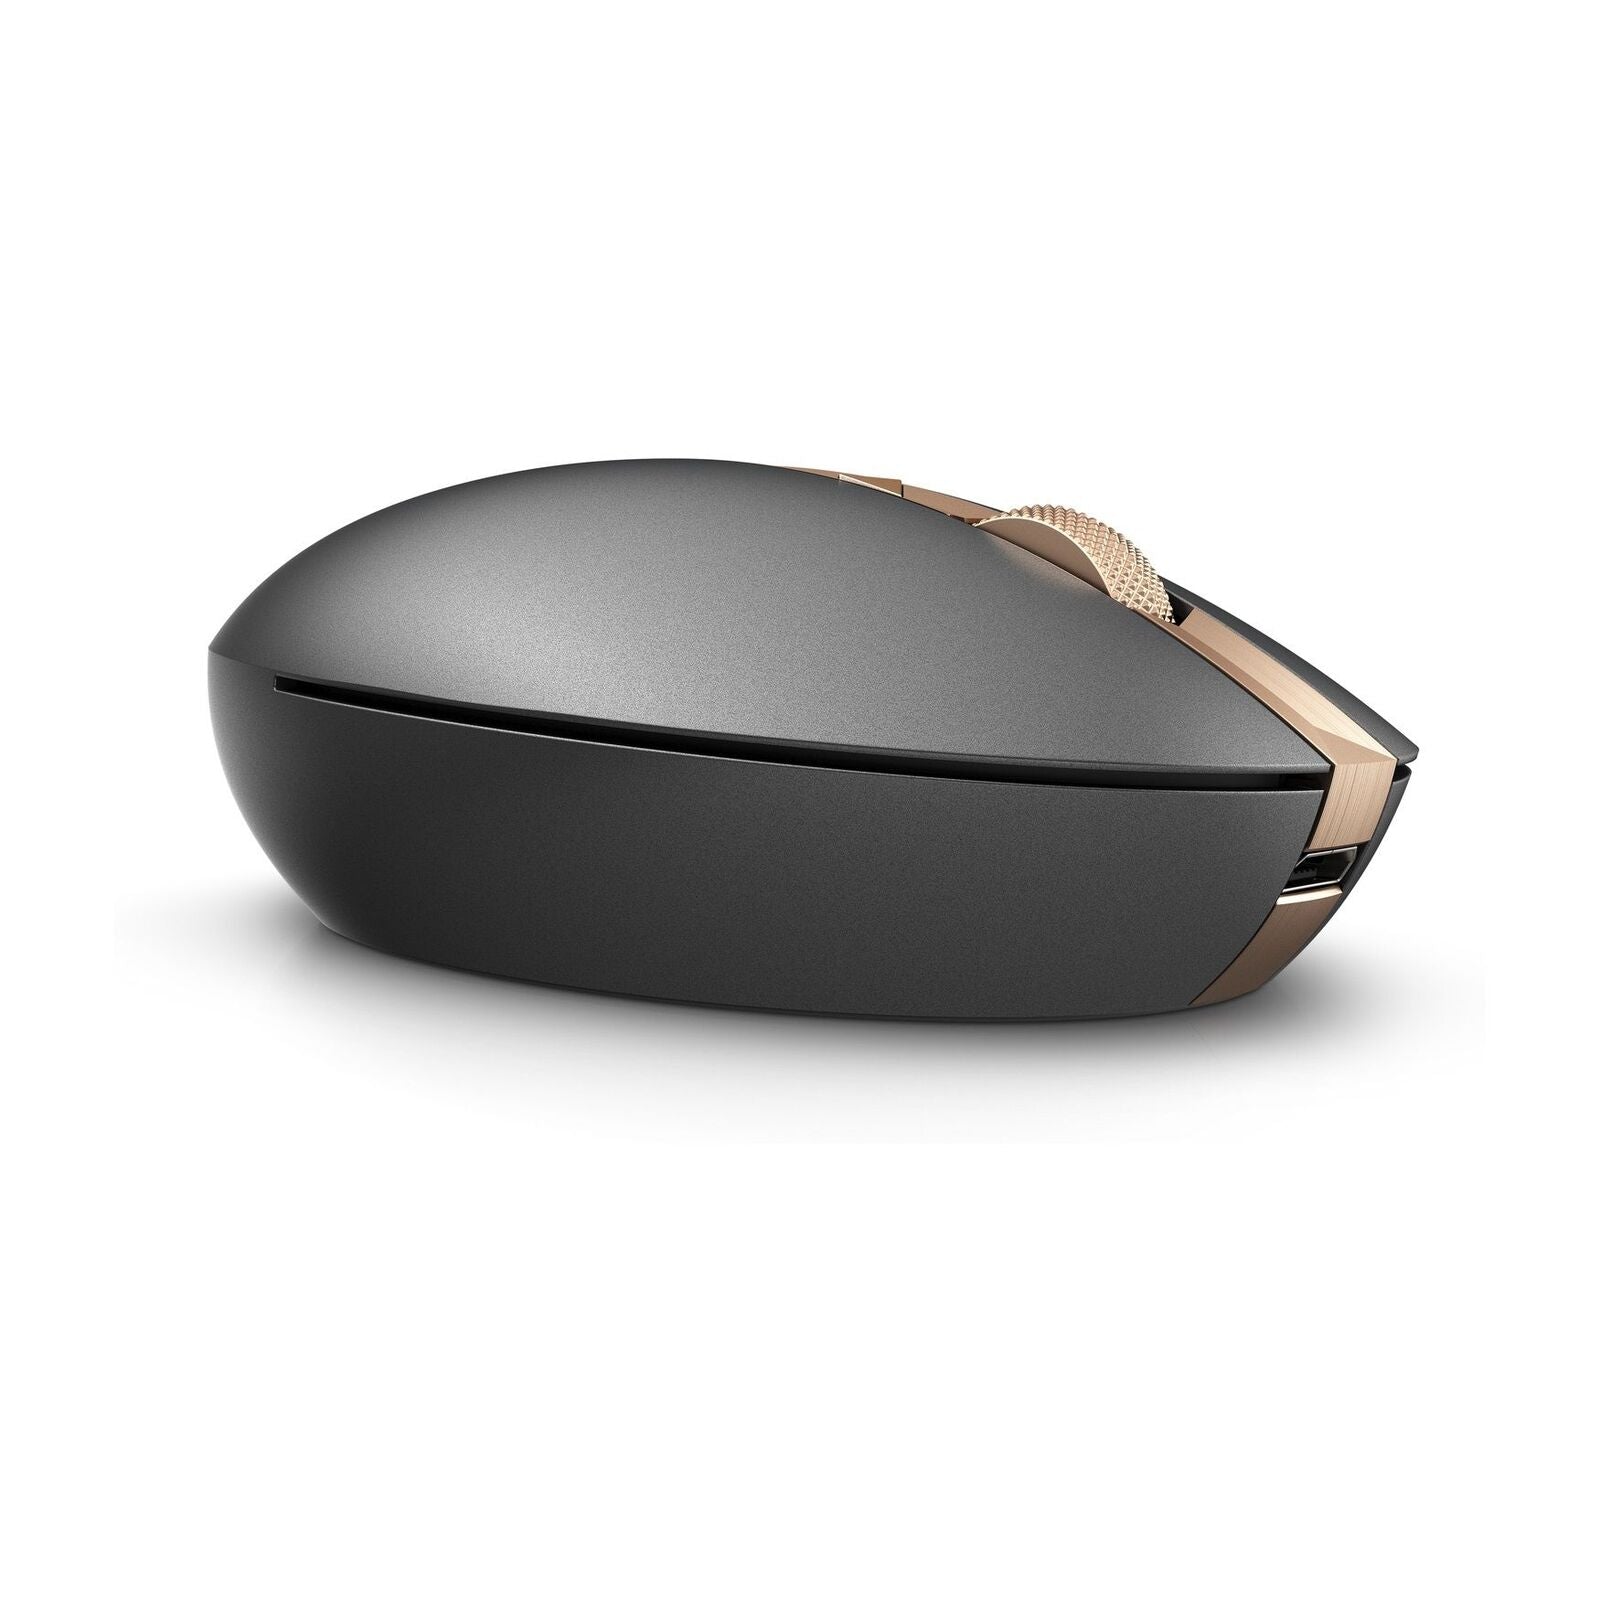 HP Spectre 700 Wireless Bluetooth Rechargeable Mouse - Ash Copper